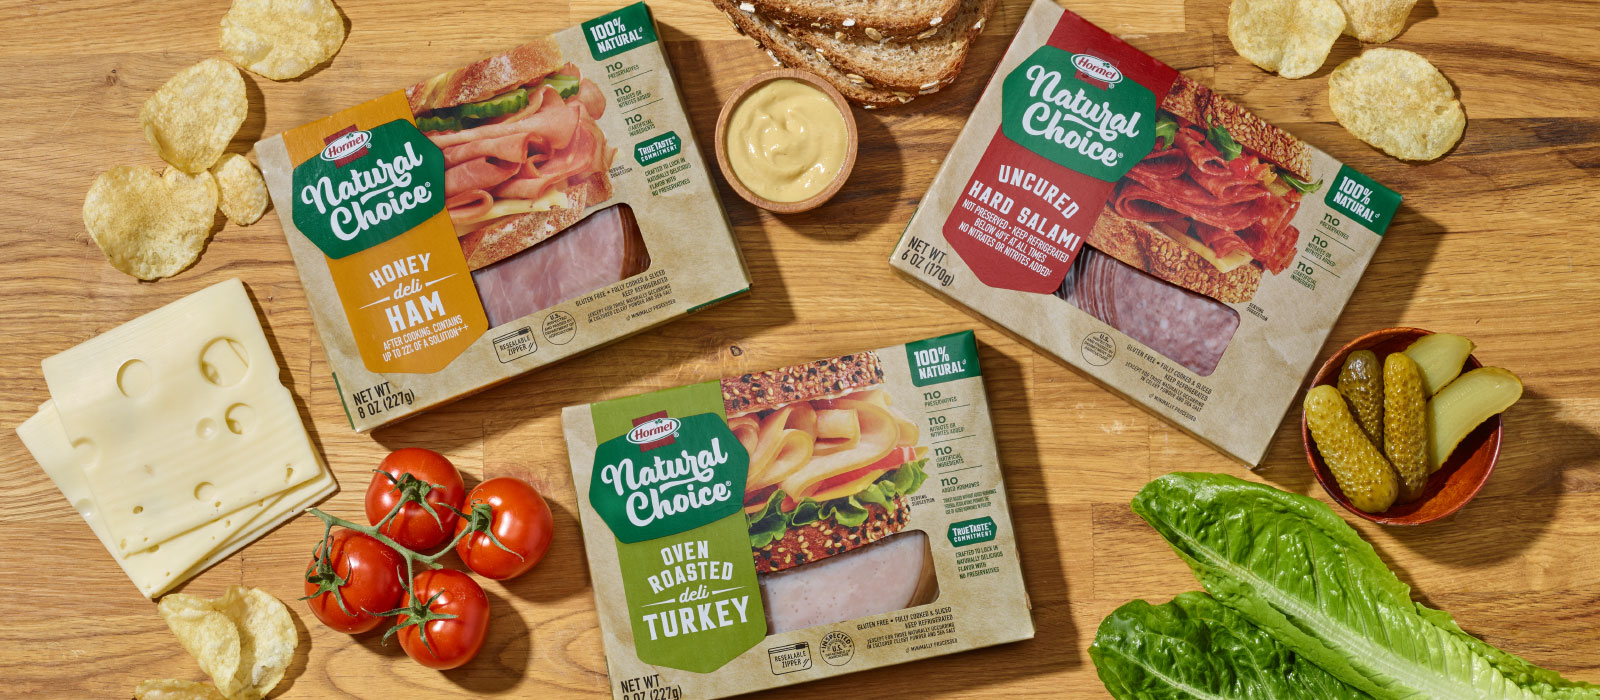 New Natural Choice meats packaging surrounded by sandwich ingredients